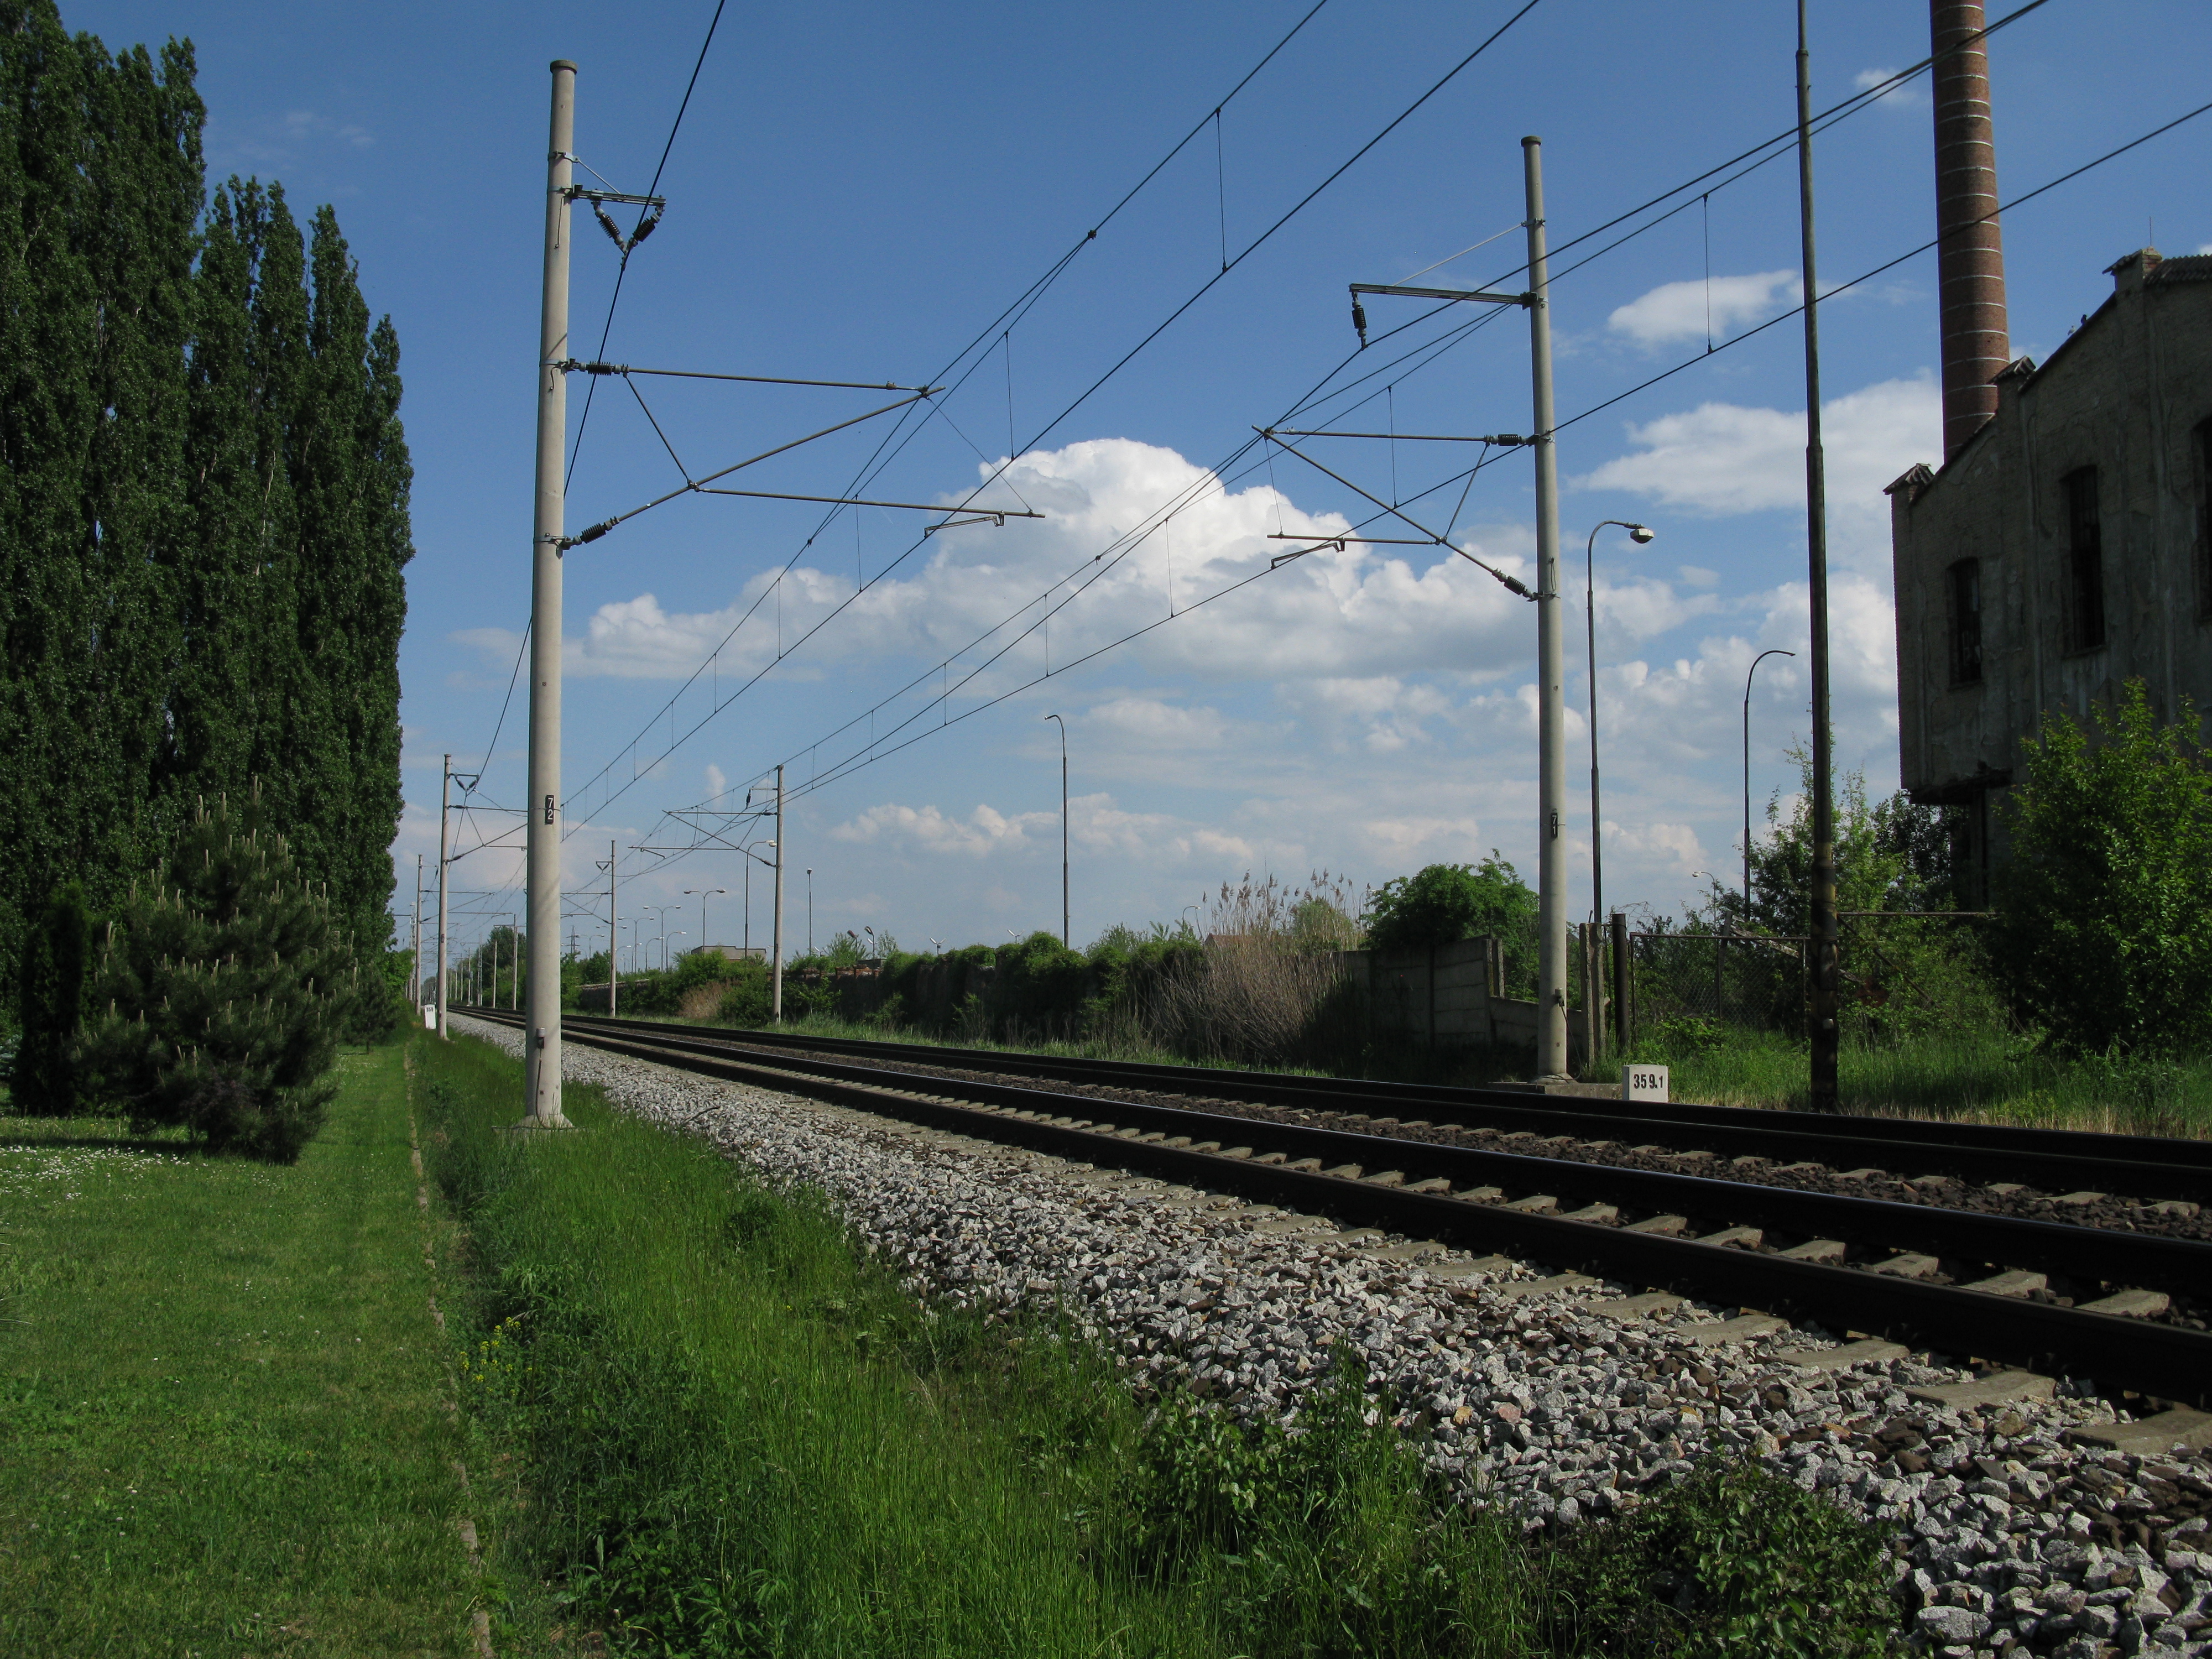 Safety commission on railway: Plan to invest CZK 90 billion to make Czech railways safer is complete